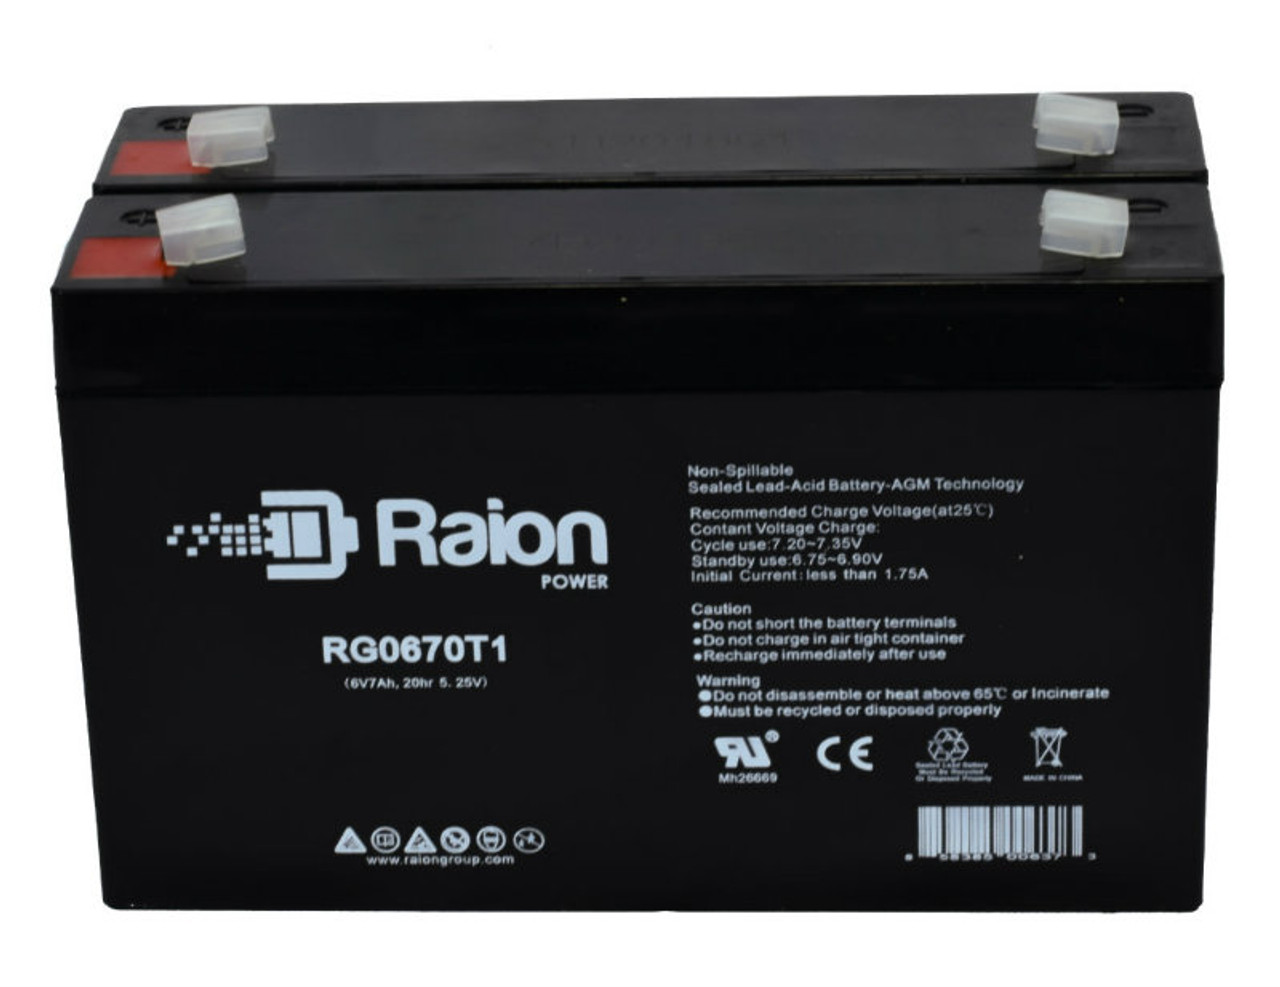 Raion Power RG0670T1 6V 7Ah Replacement Emergency Light Battery for Lightalarms LL6 - 2 Pack